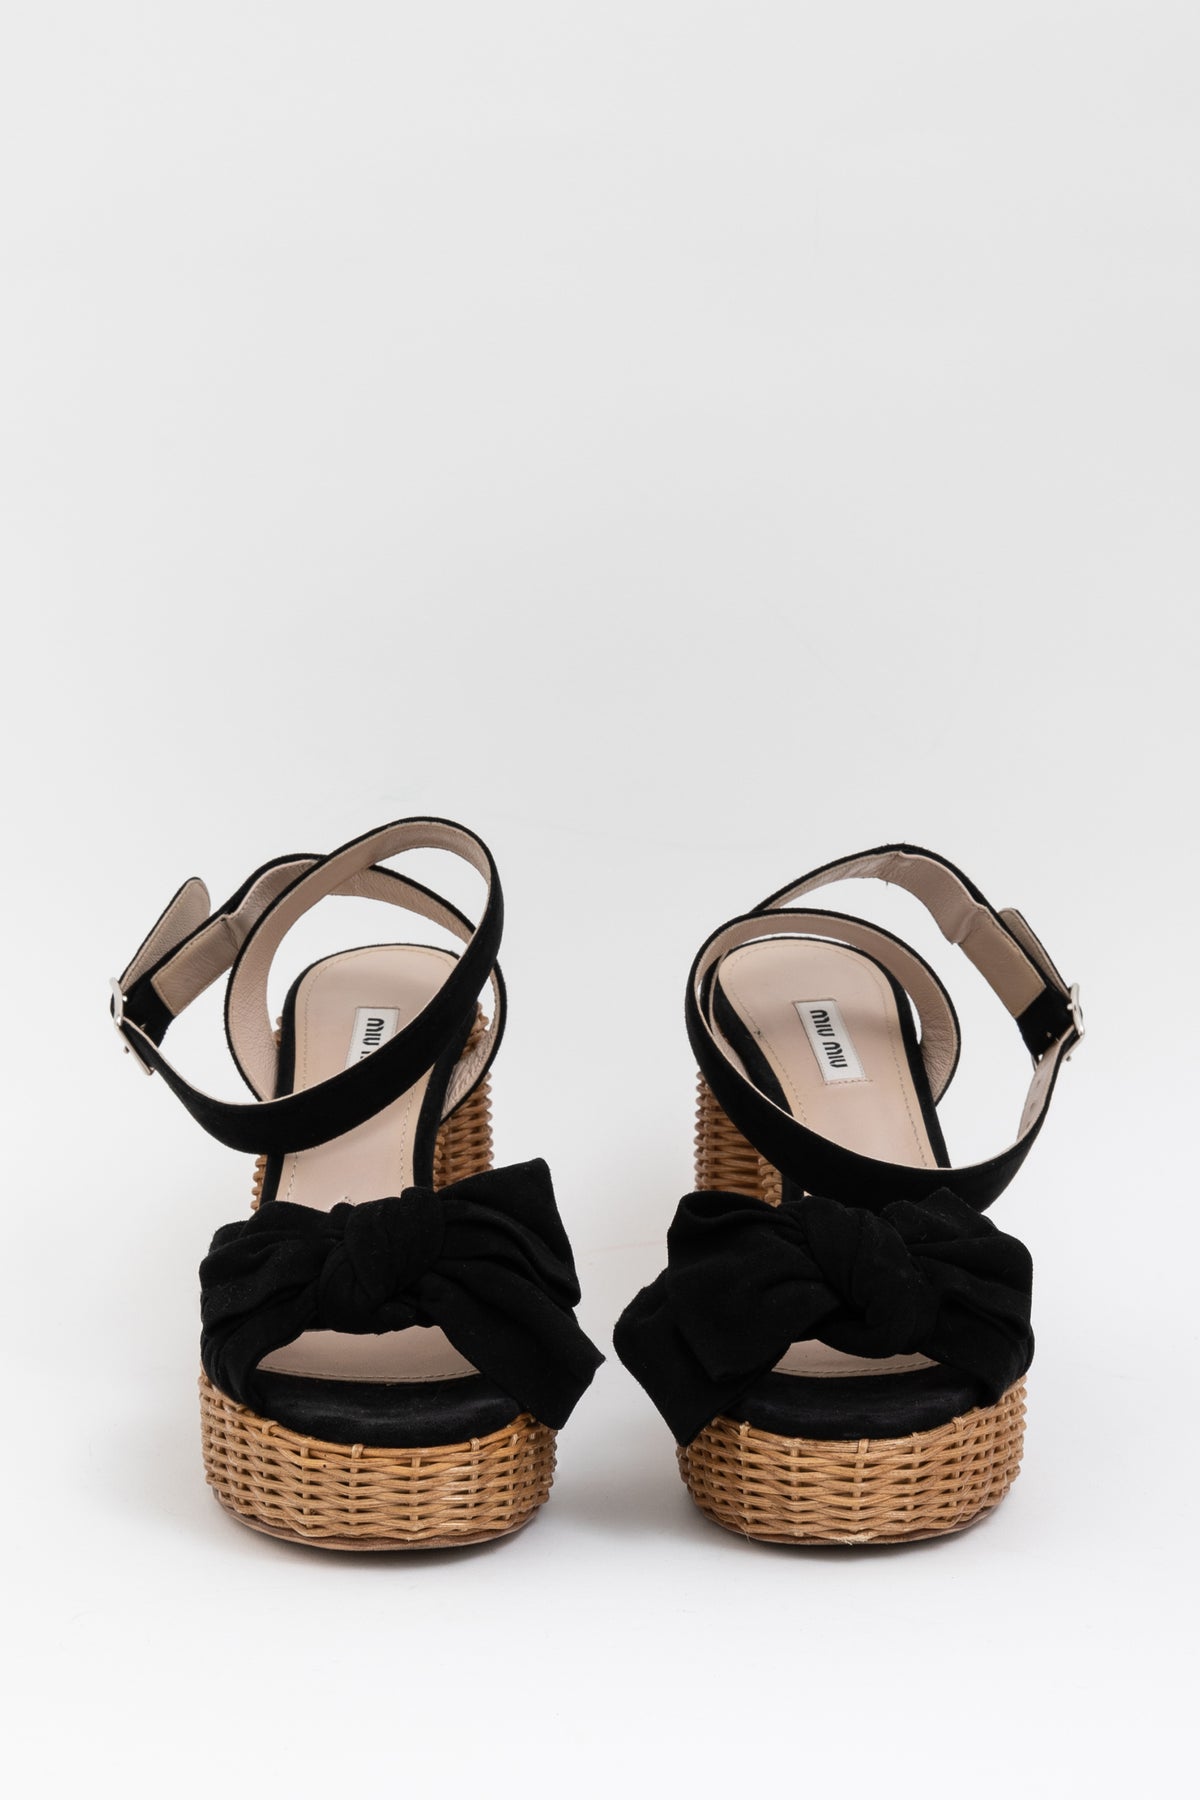 Suede Bow and Wicker Heels